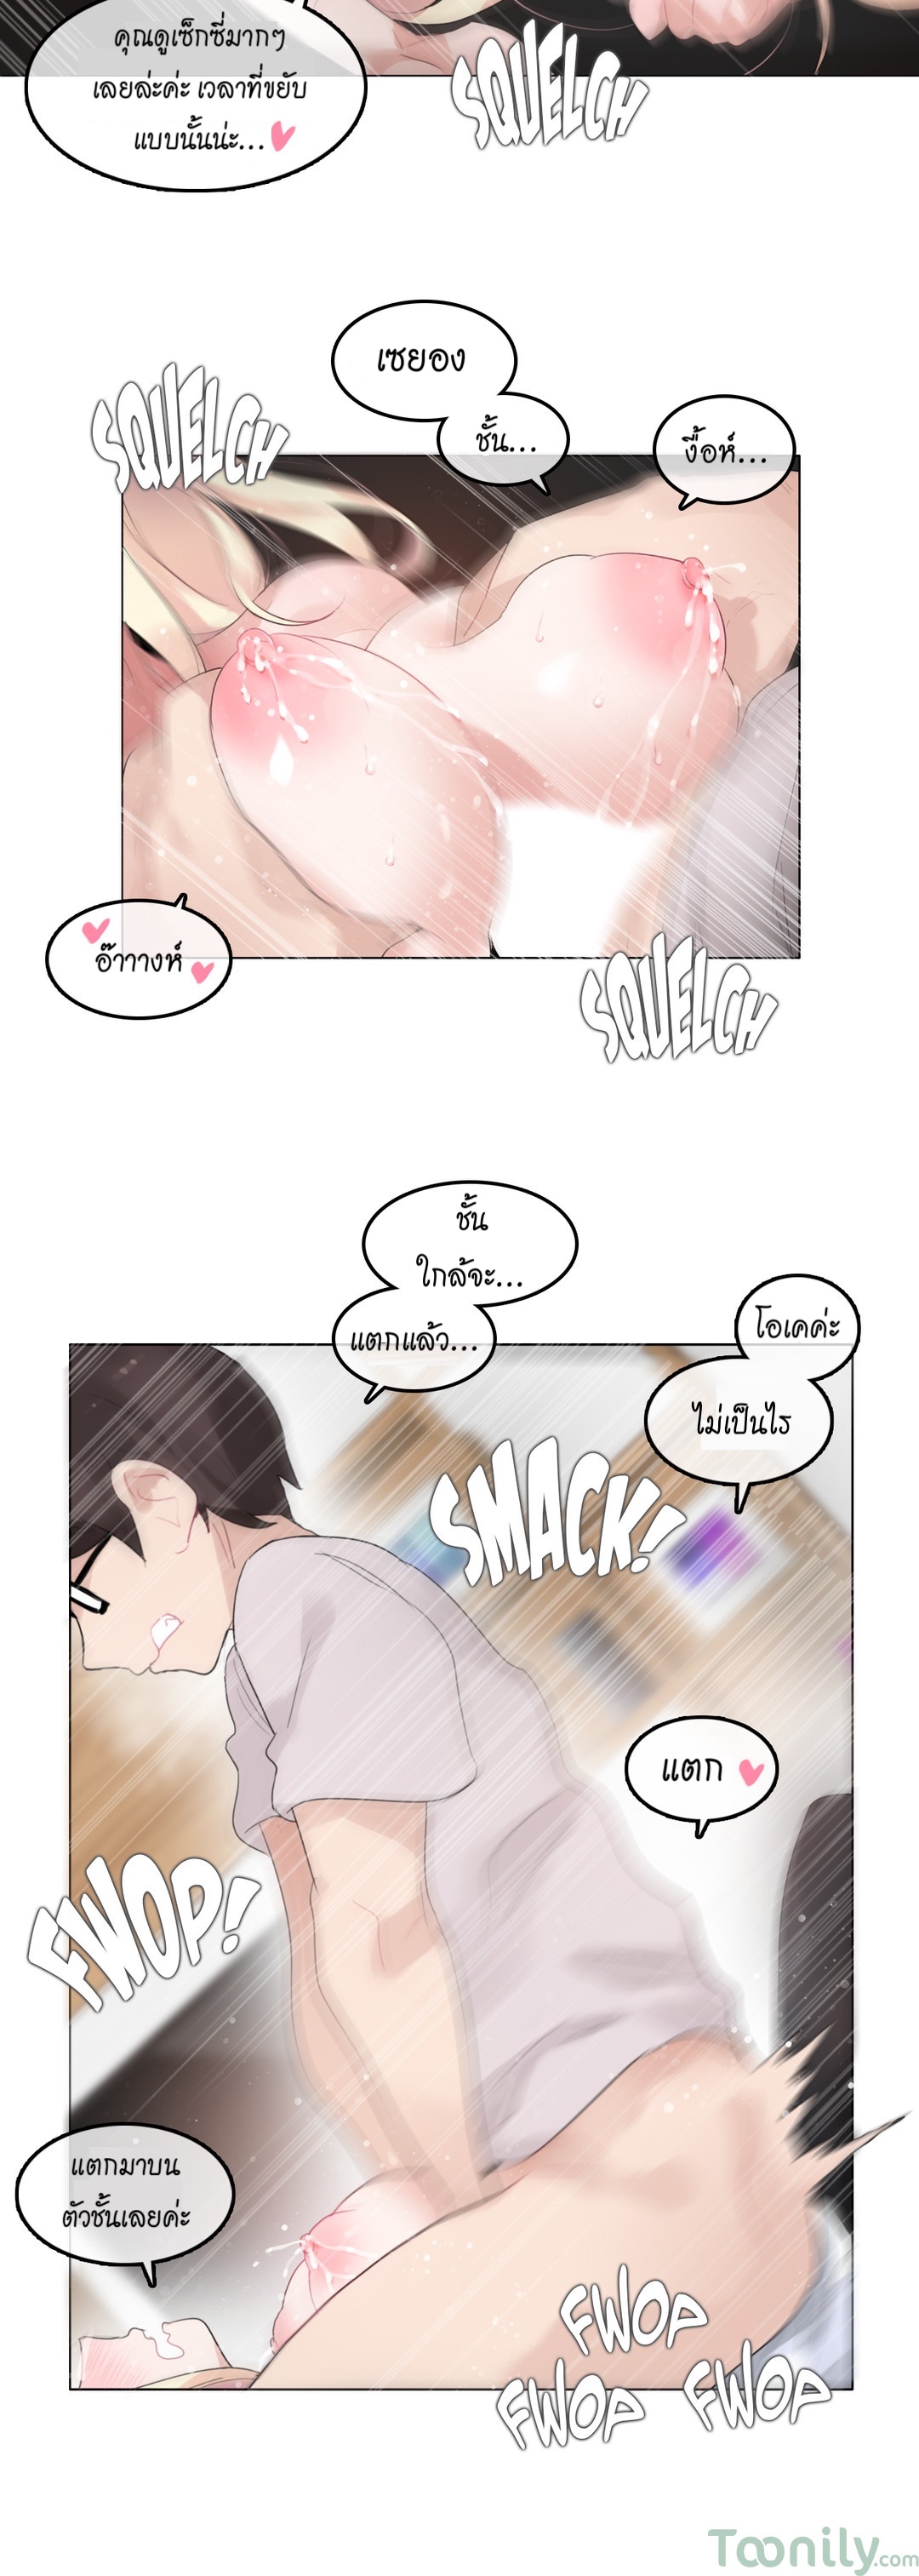 A Pervert’s Daily Life59 (15)